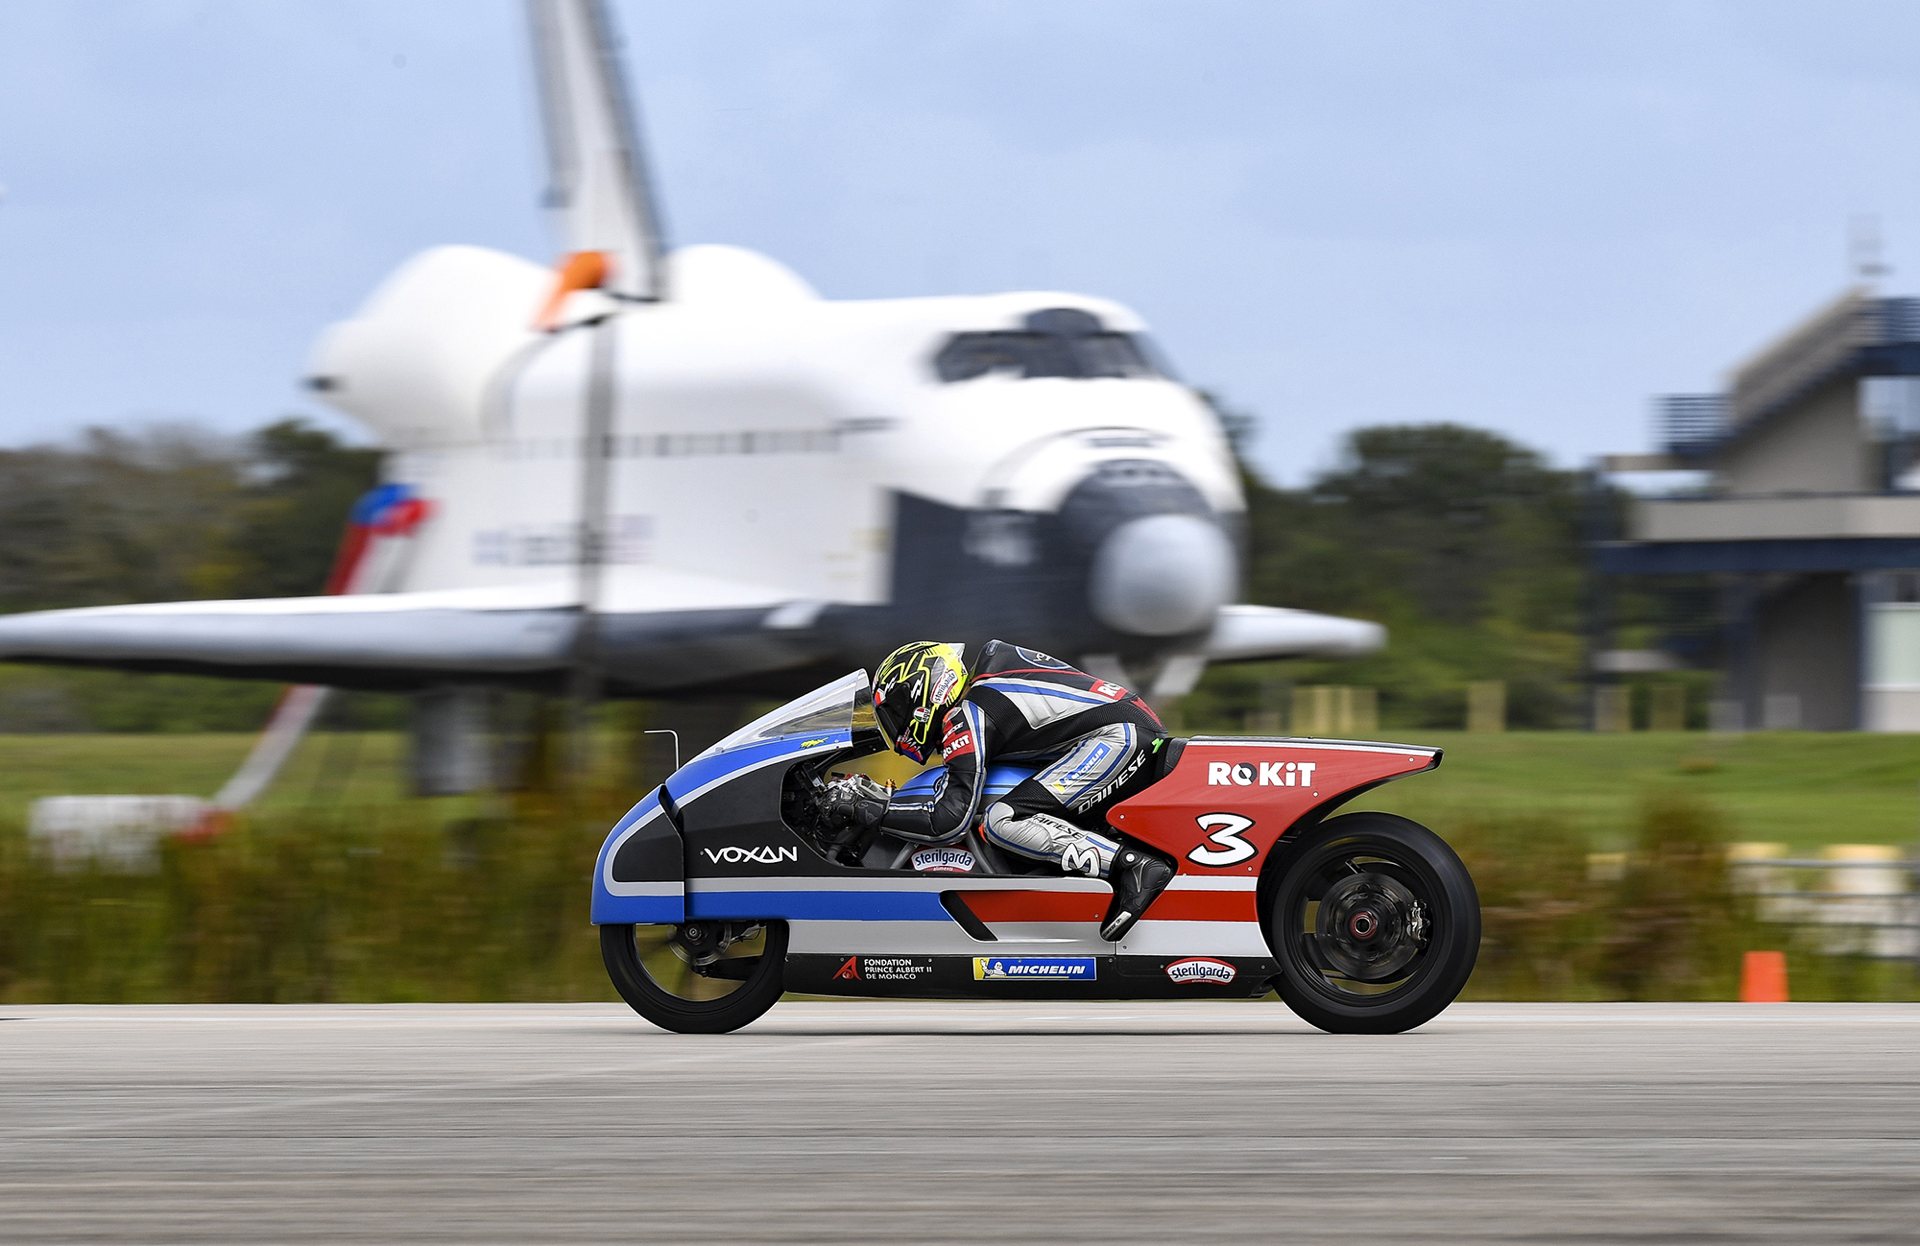 456 km/h (283 mph): the VOXAN Wattman remains the fastest electric motorcycle in the world